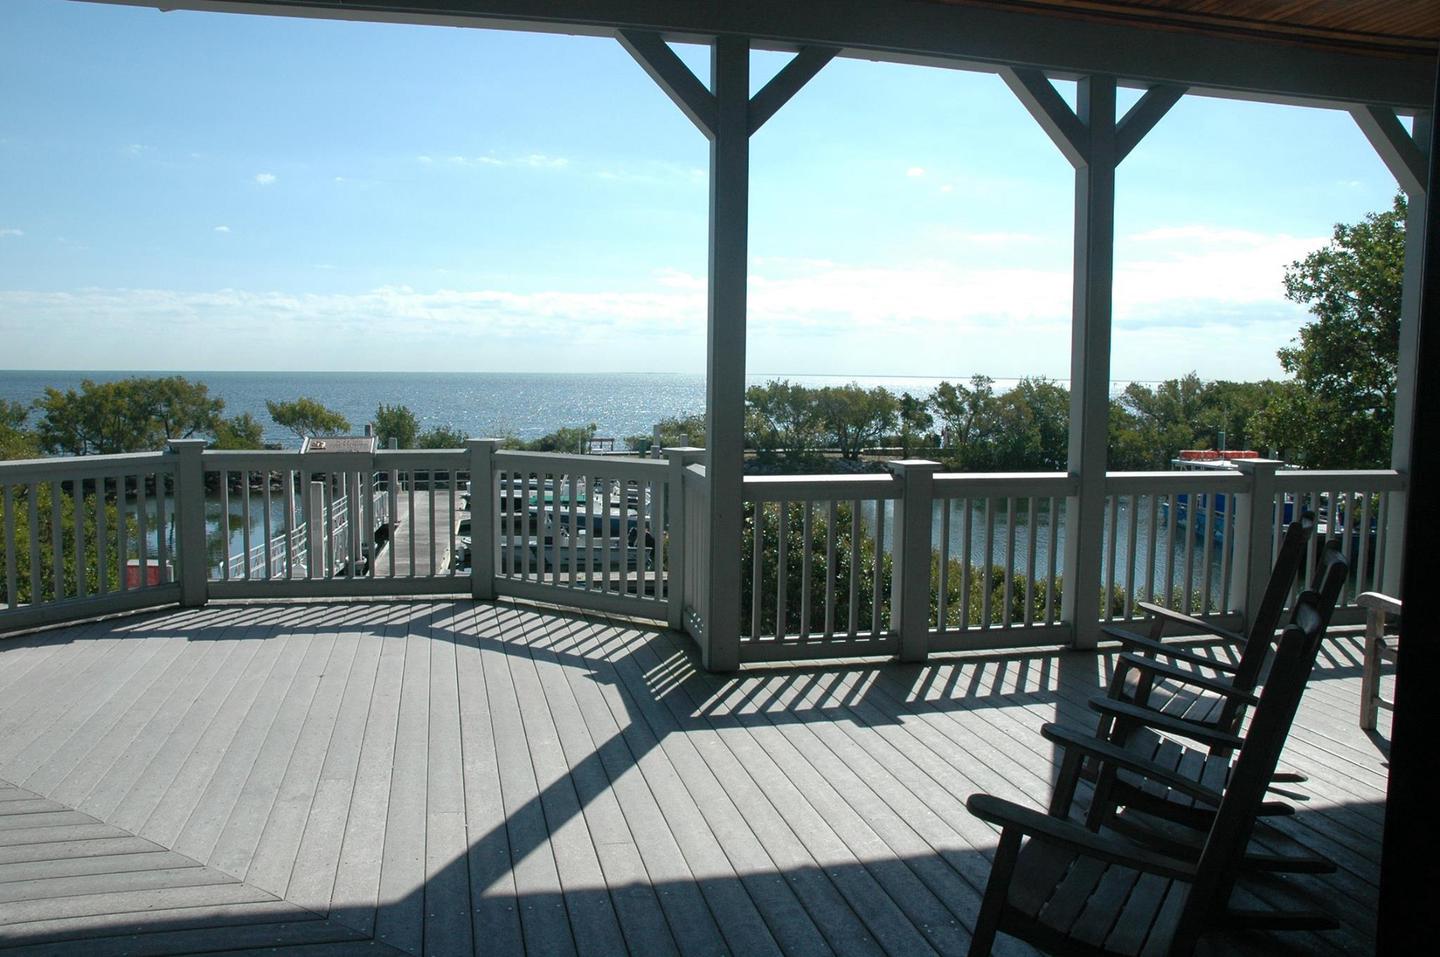 View from the Visitor Center PorchRelax and enjoy the panoramic view of Biscayne Bay while sitting in one of the rocking chairs on the porch.